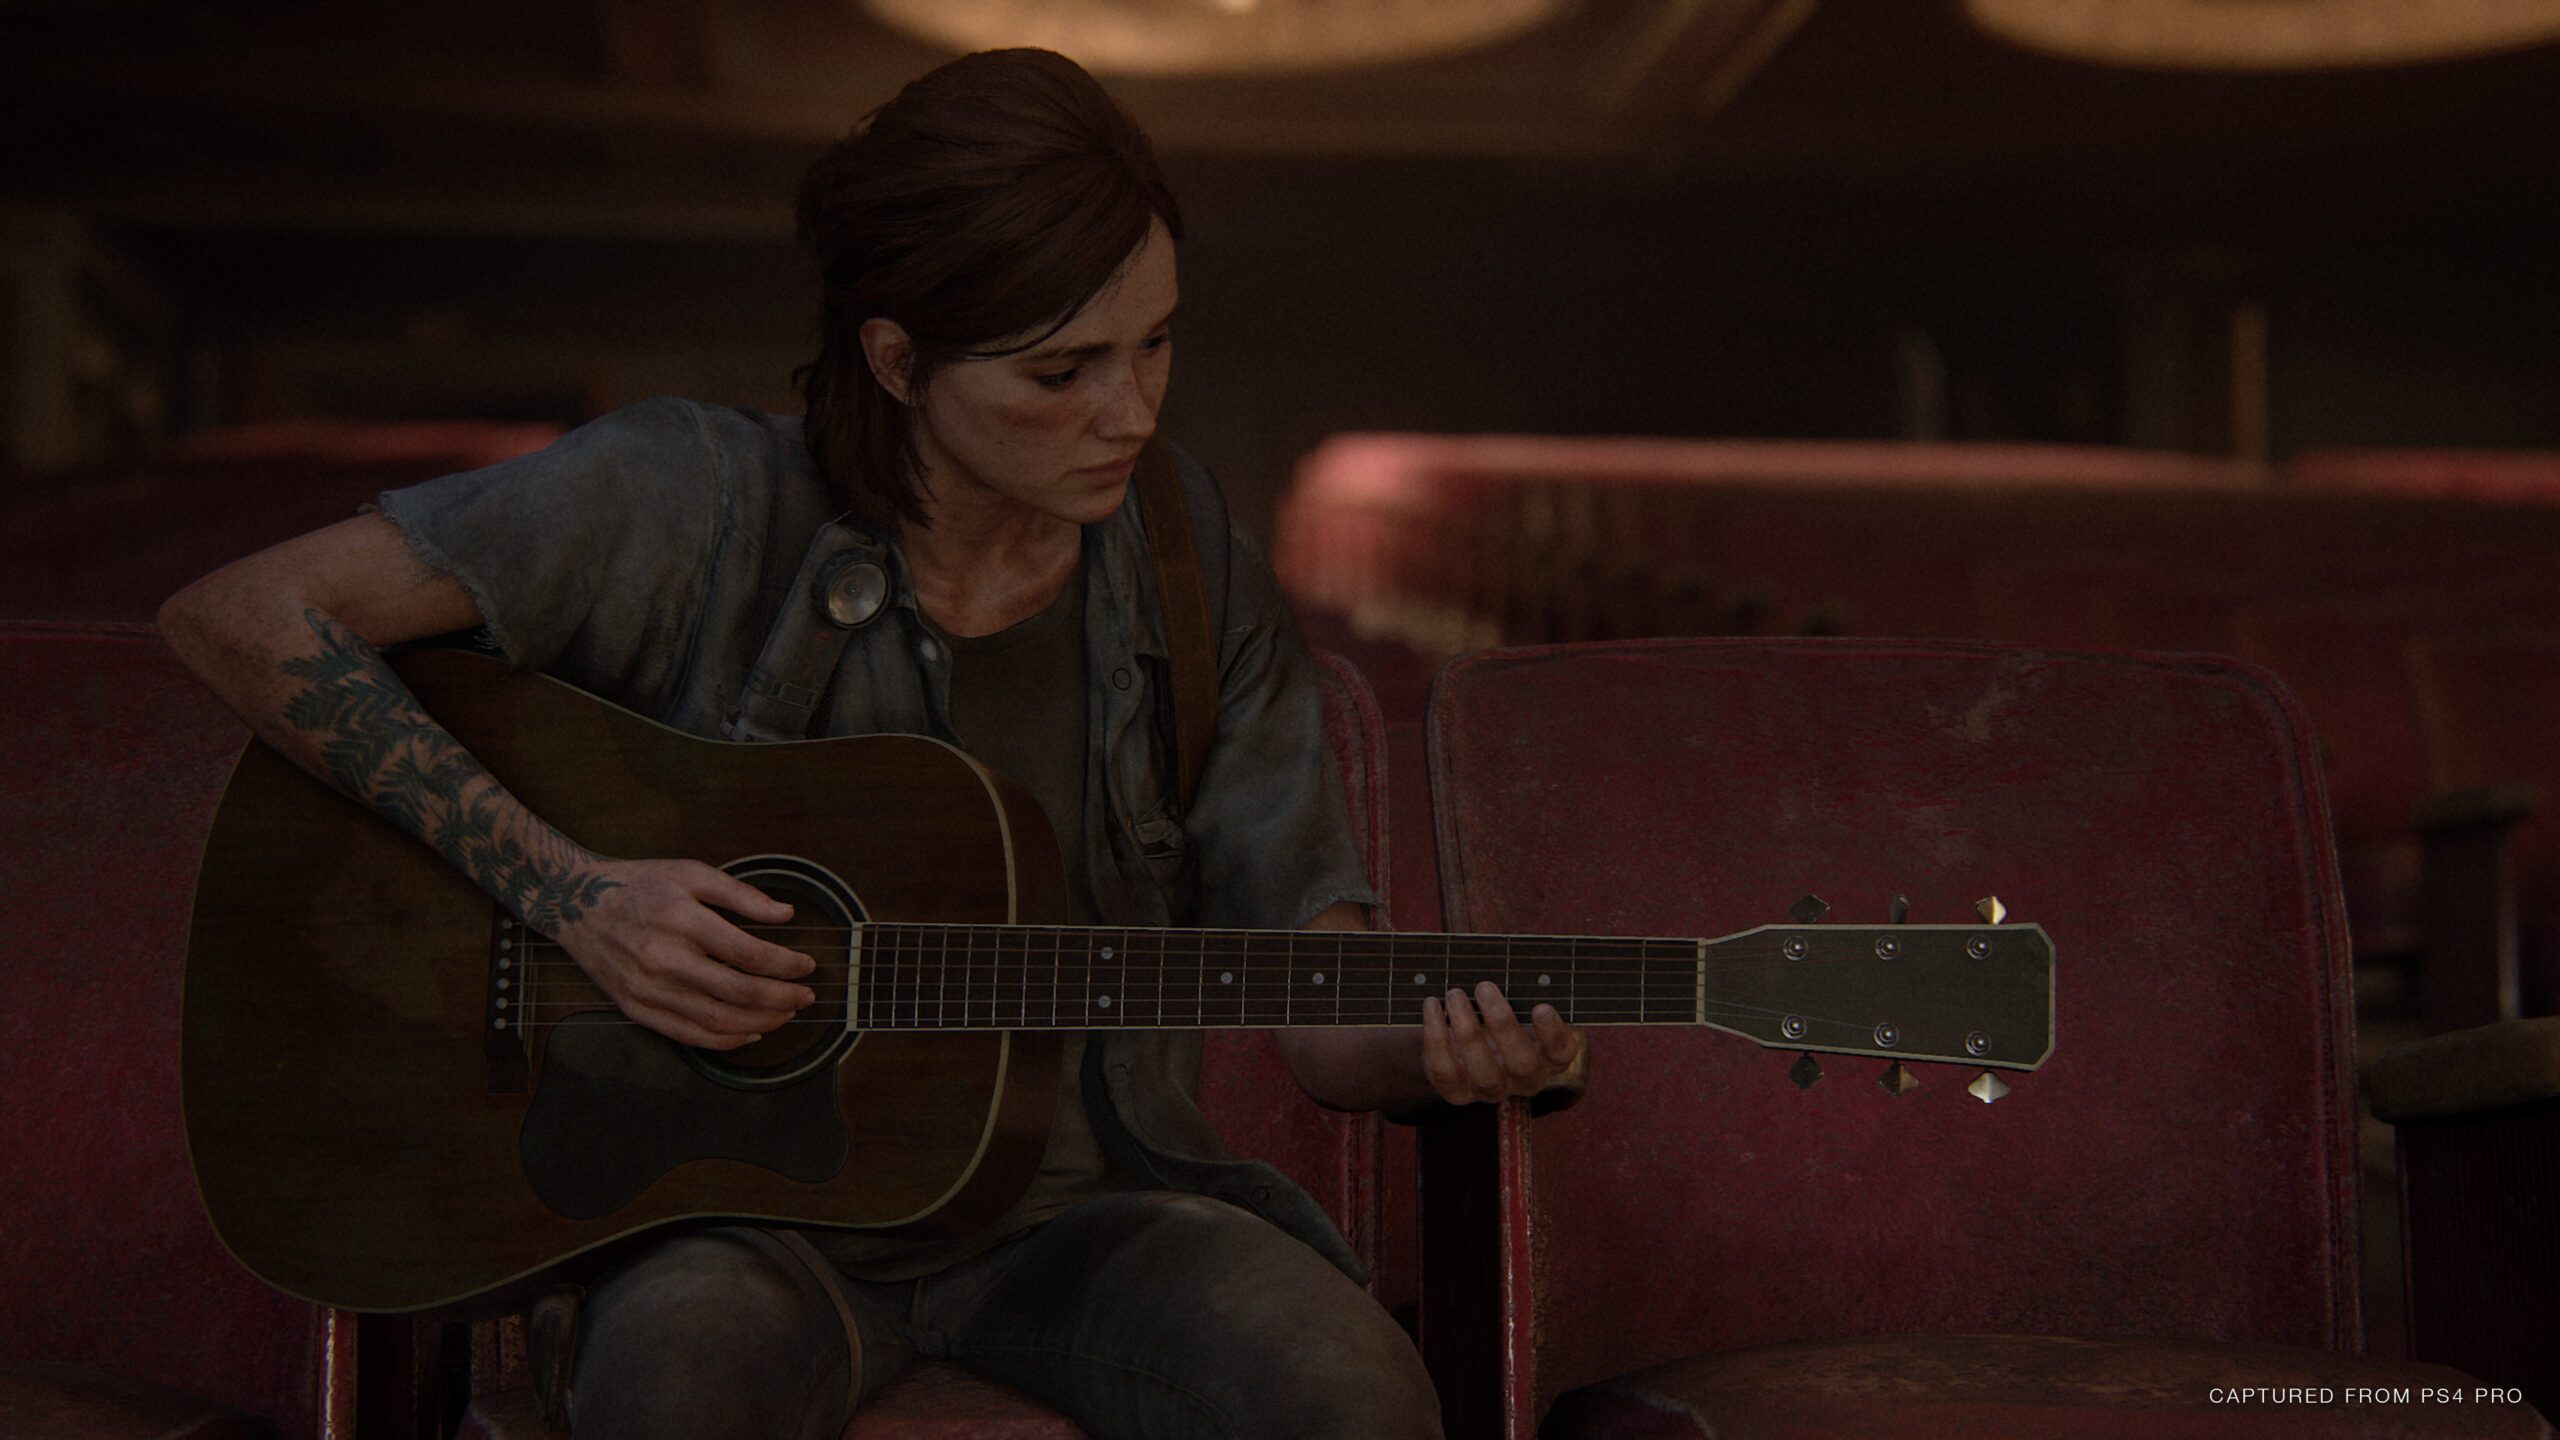 Fine-tuning The Last of Us Part II’s interactive guitar – PlayStation.Blog